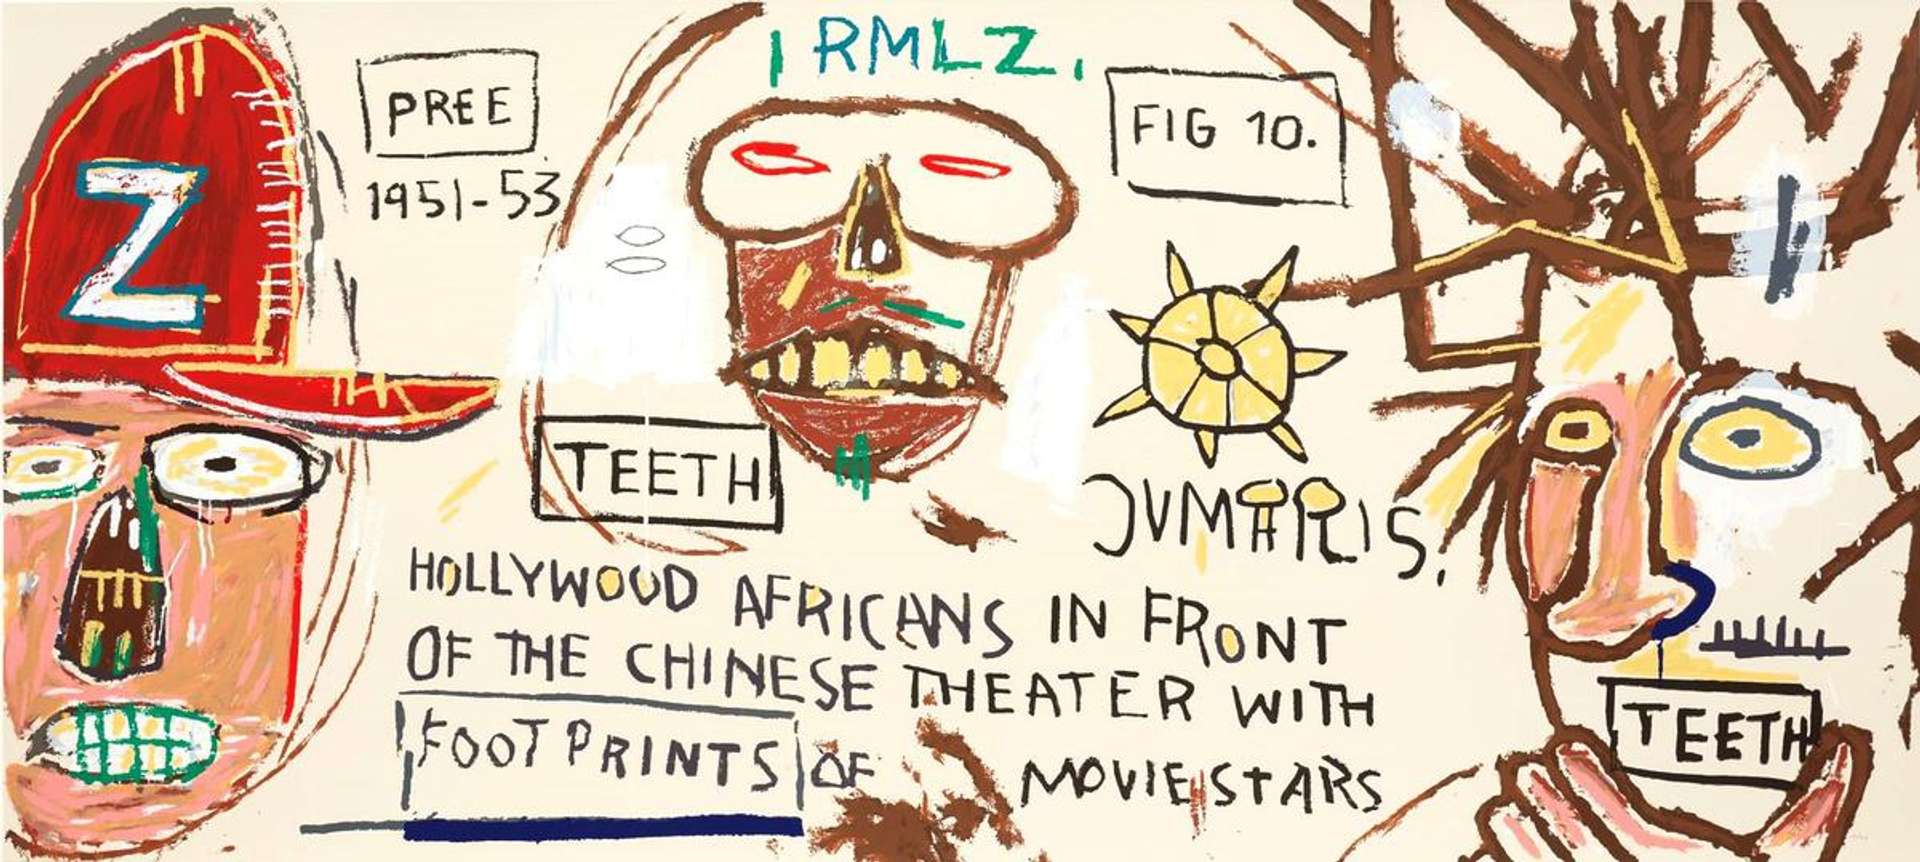 In this print, we see Basquiat depicted together with close friends Toxic and Ramellzee. The image, with its exaggerated stereotypes of Blackness, point to the restrictive and demeaning depictions of people of colour in the history of American film.